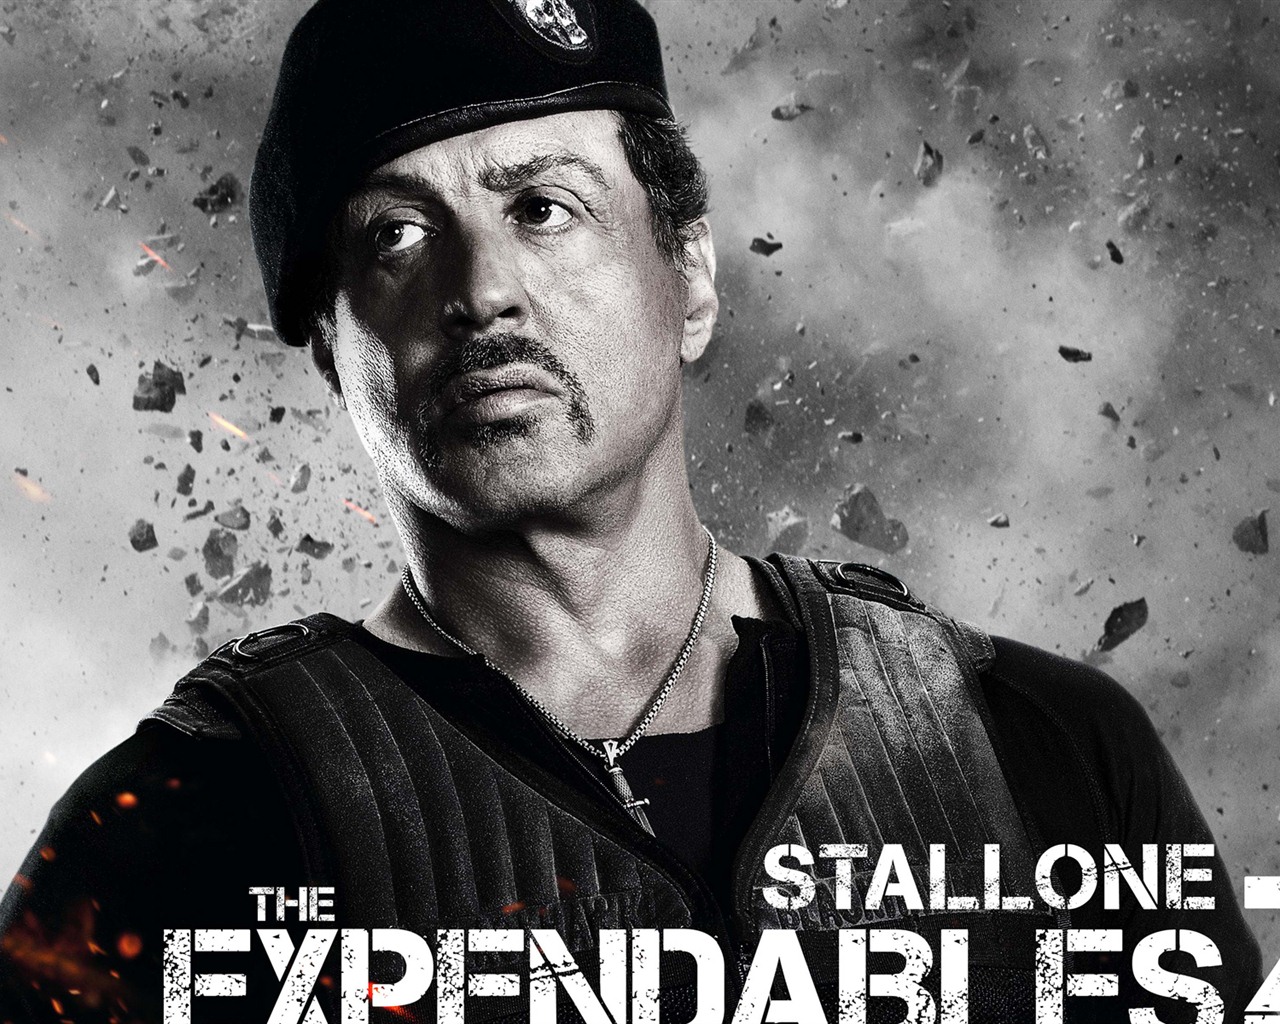 2012 The Expendables 2 敢死队2 高清壁纸9 - 1280x1024